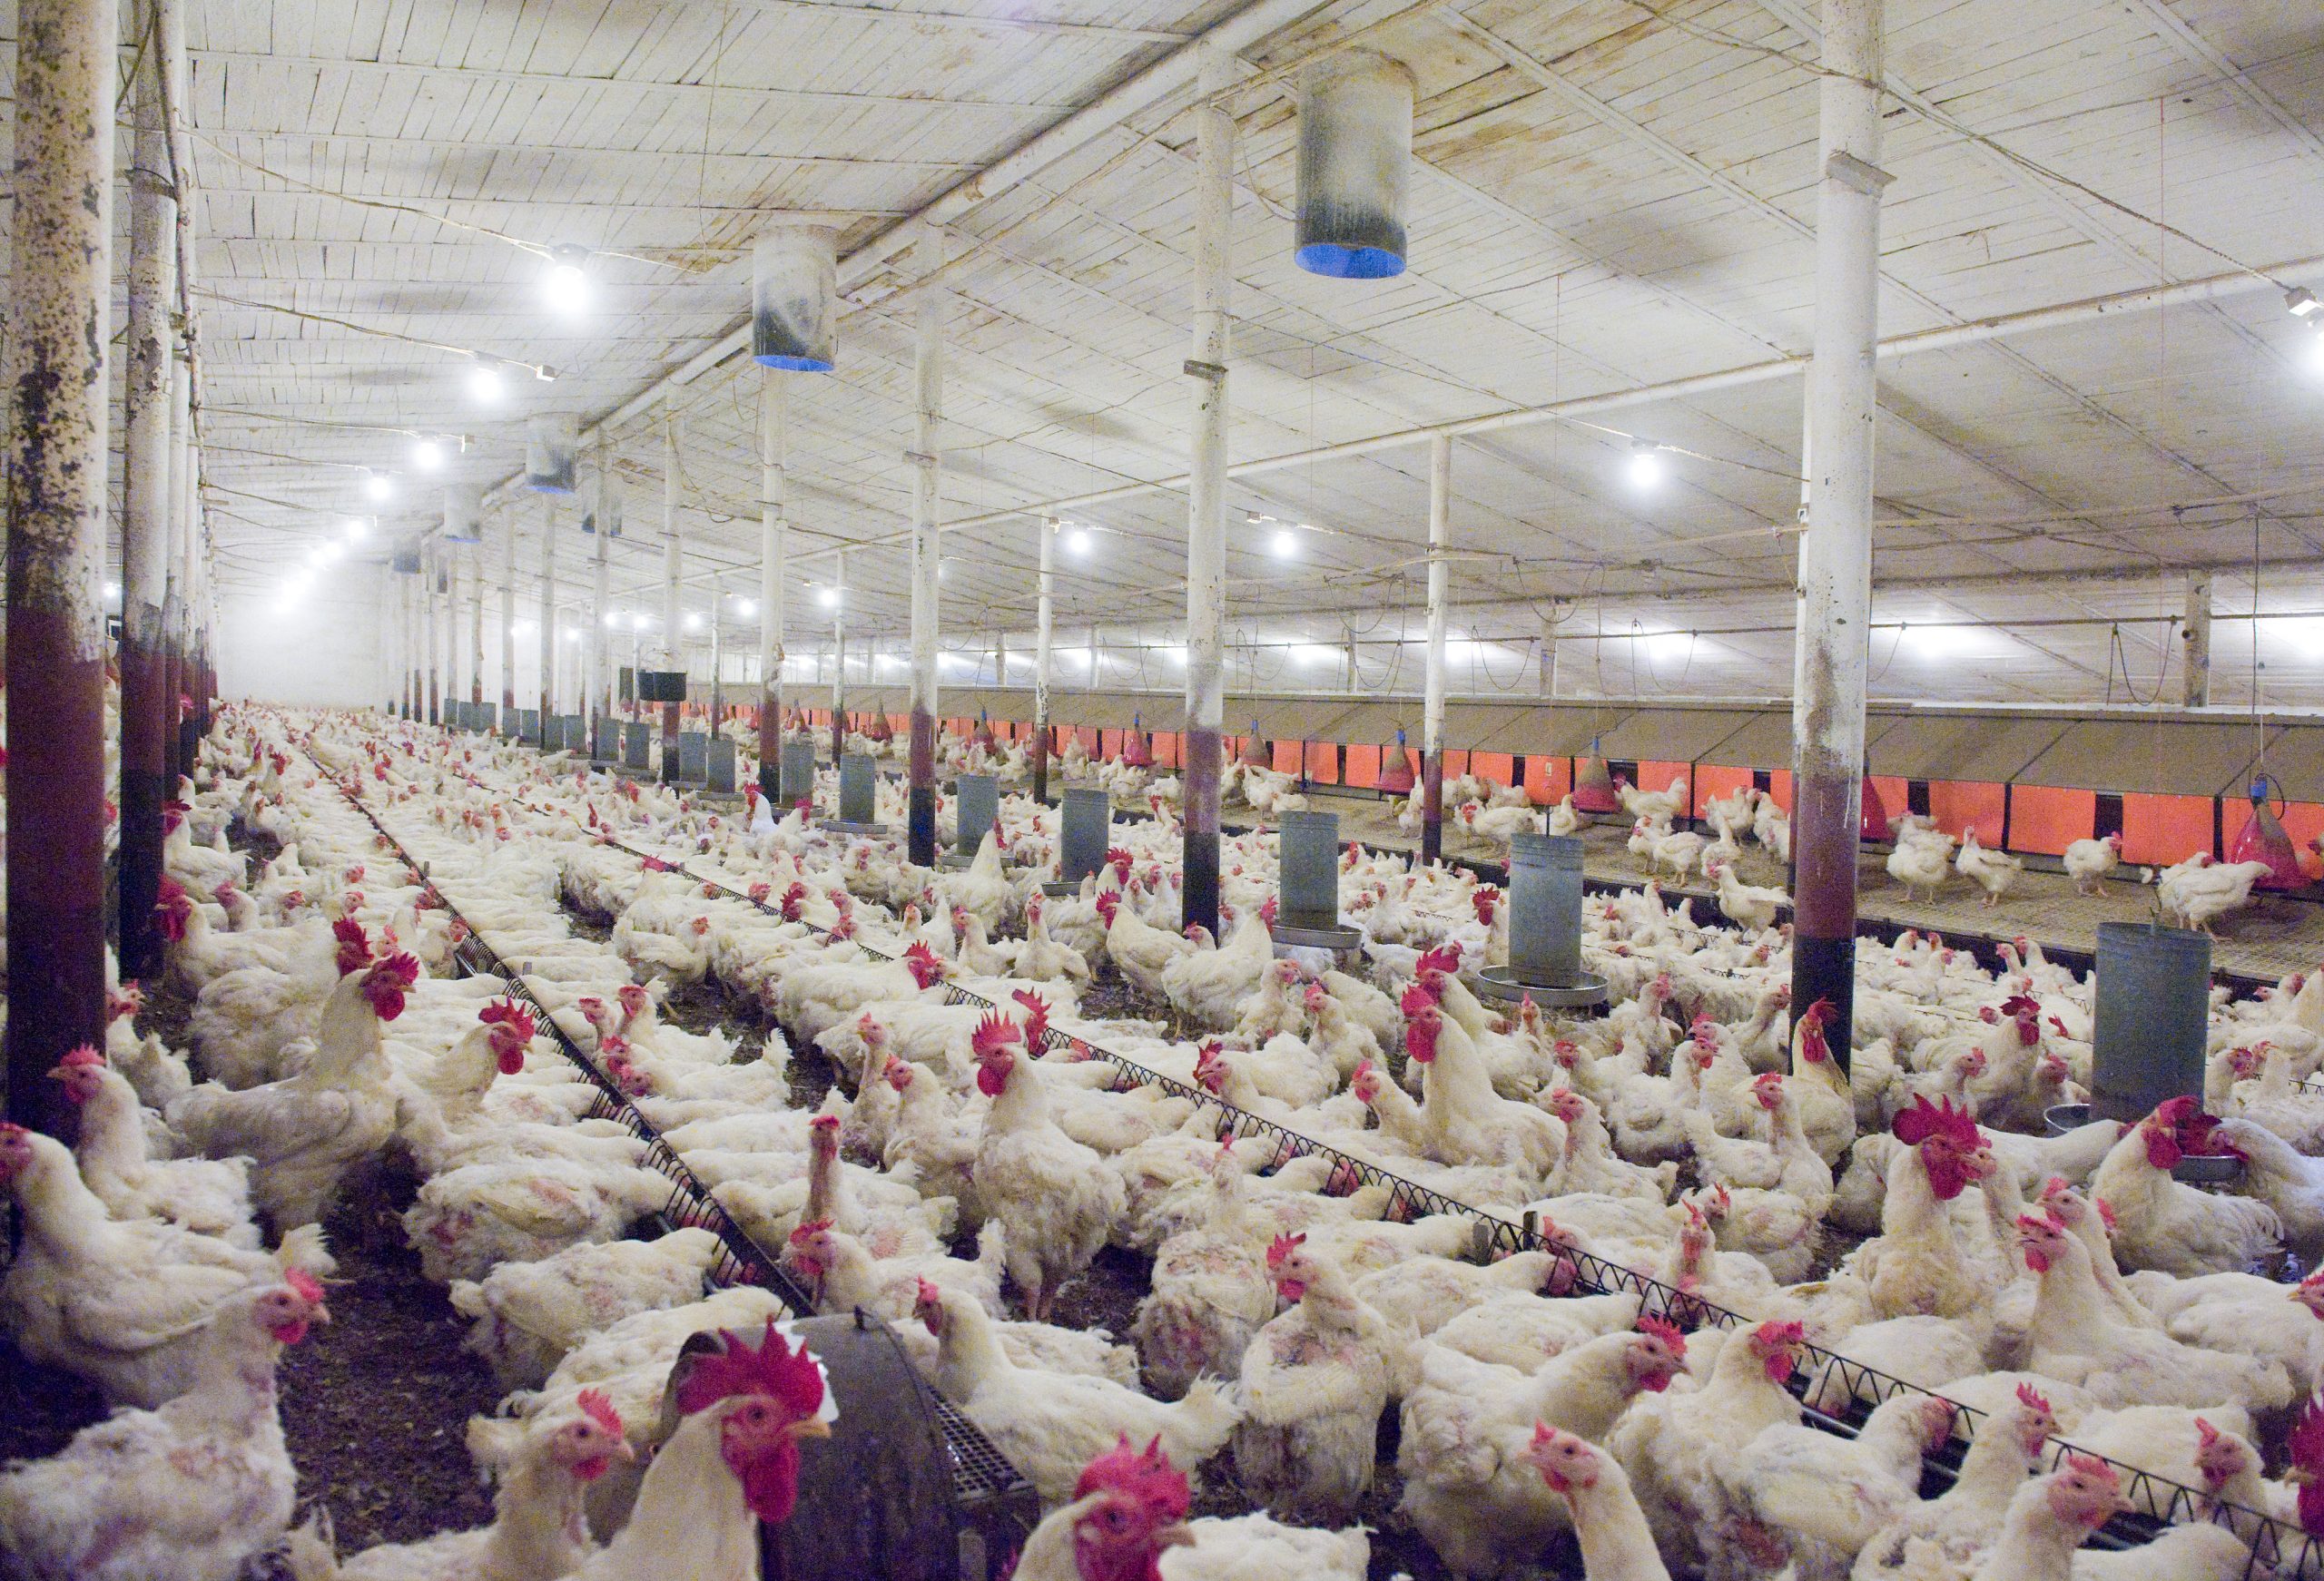 what is the proper housing for poultry